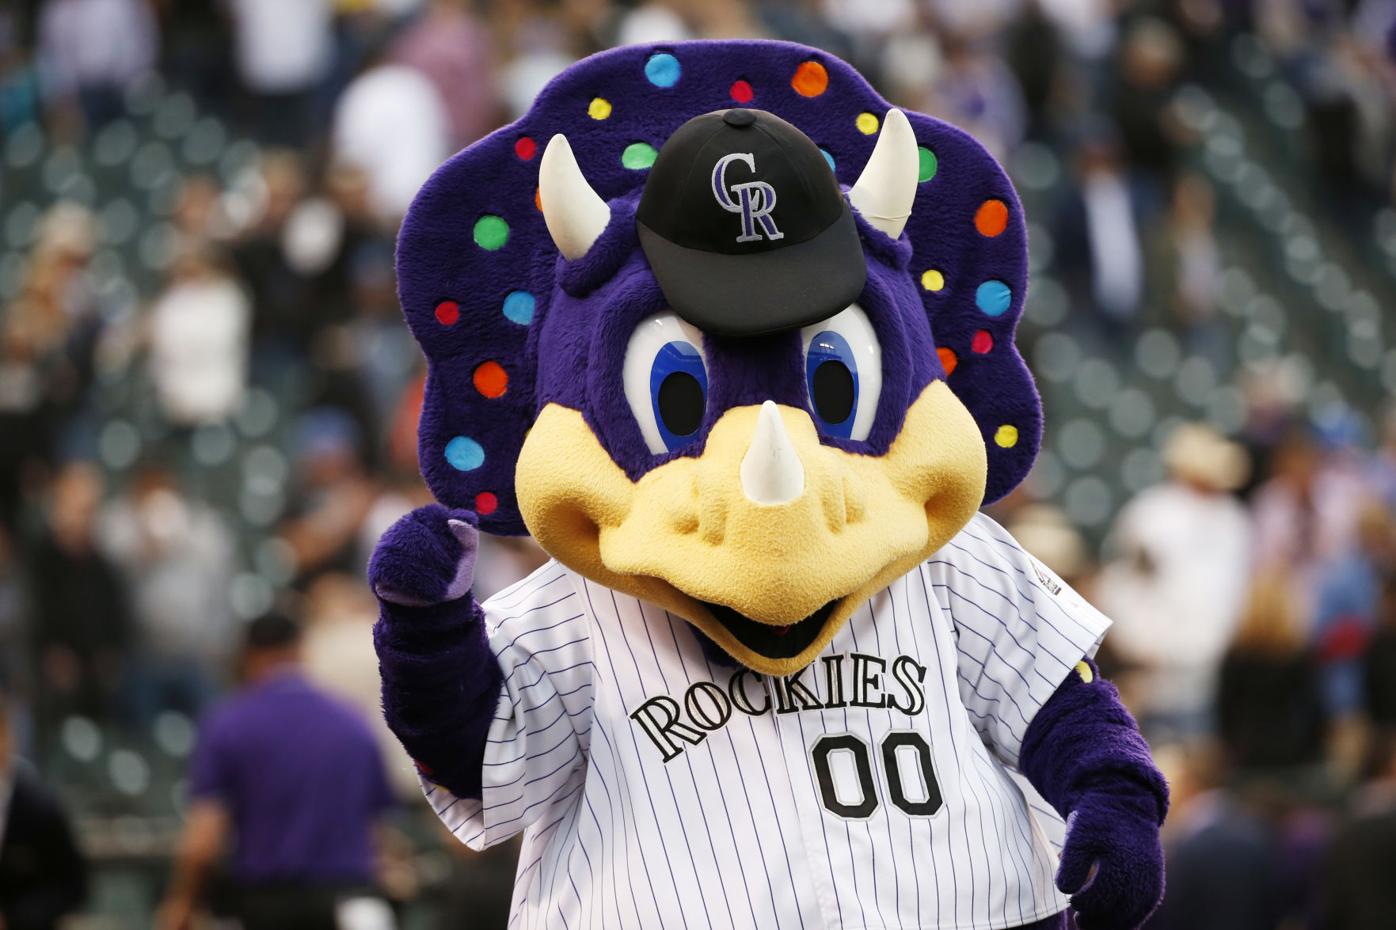 Fan who attacked Colorado Rockies mascot Dinger turns himself in